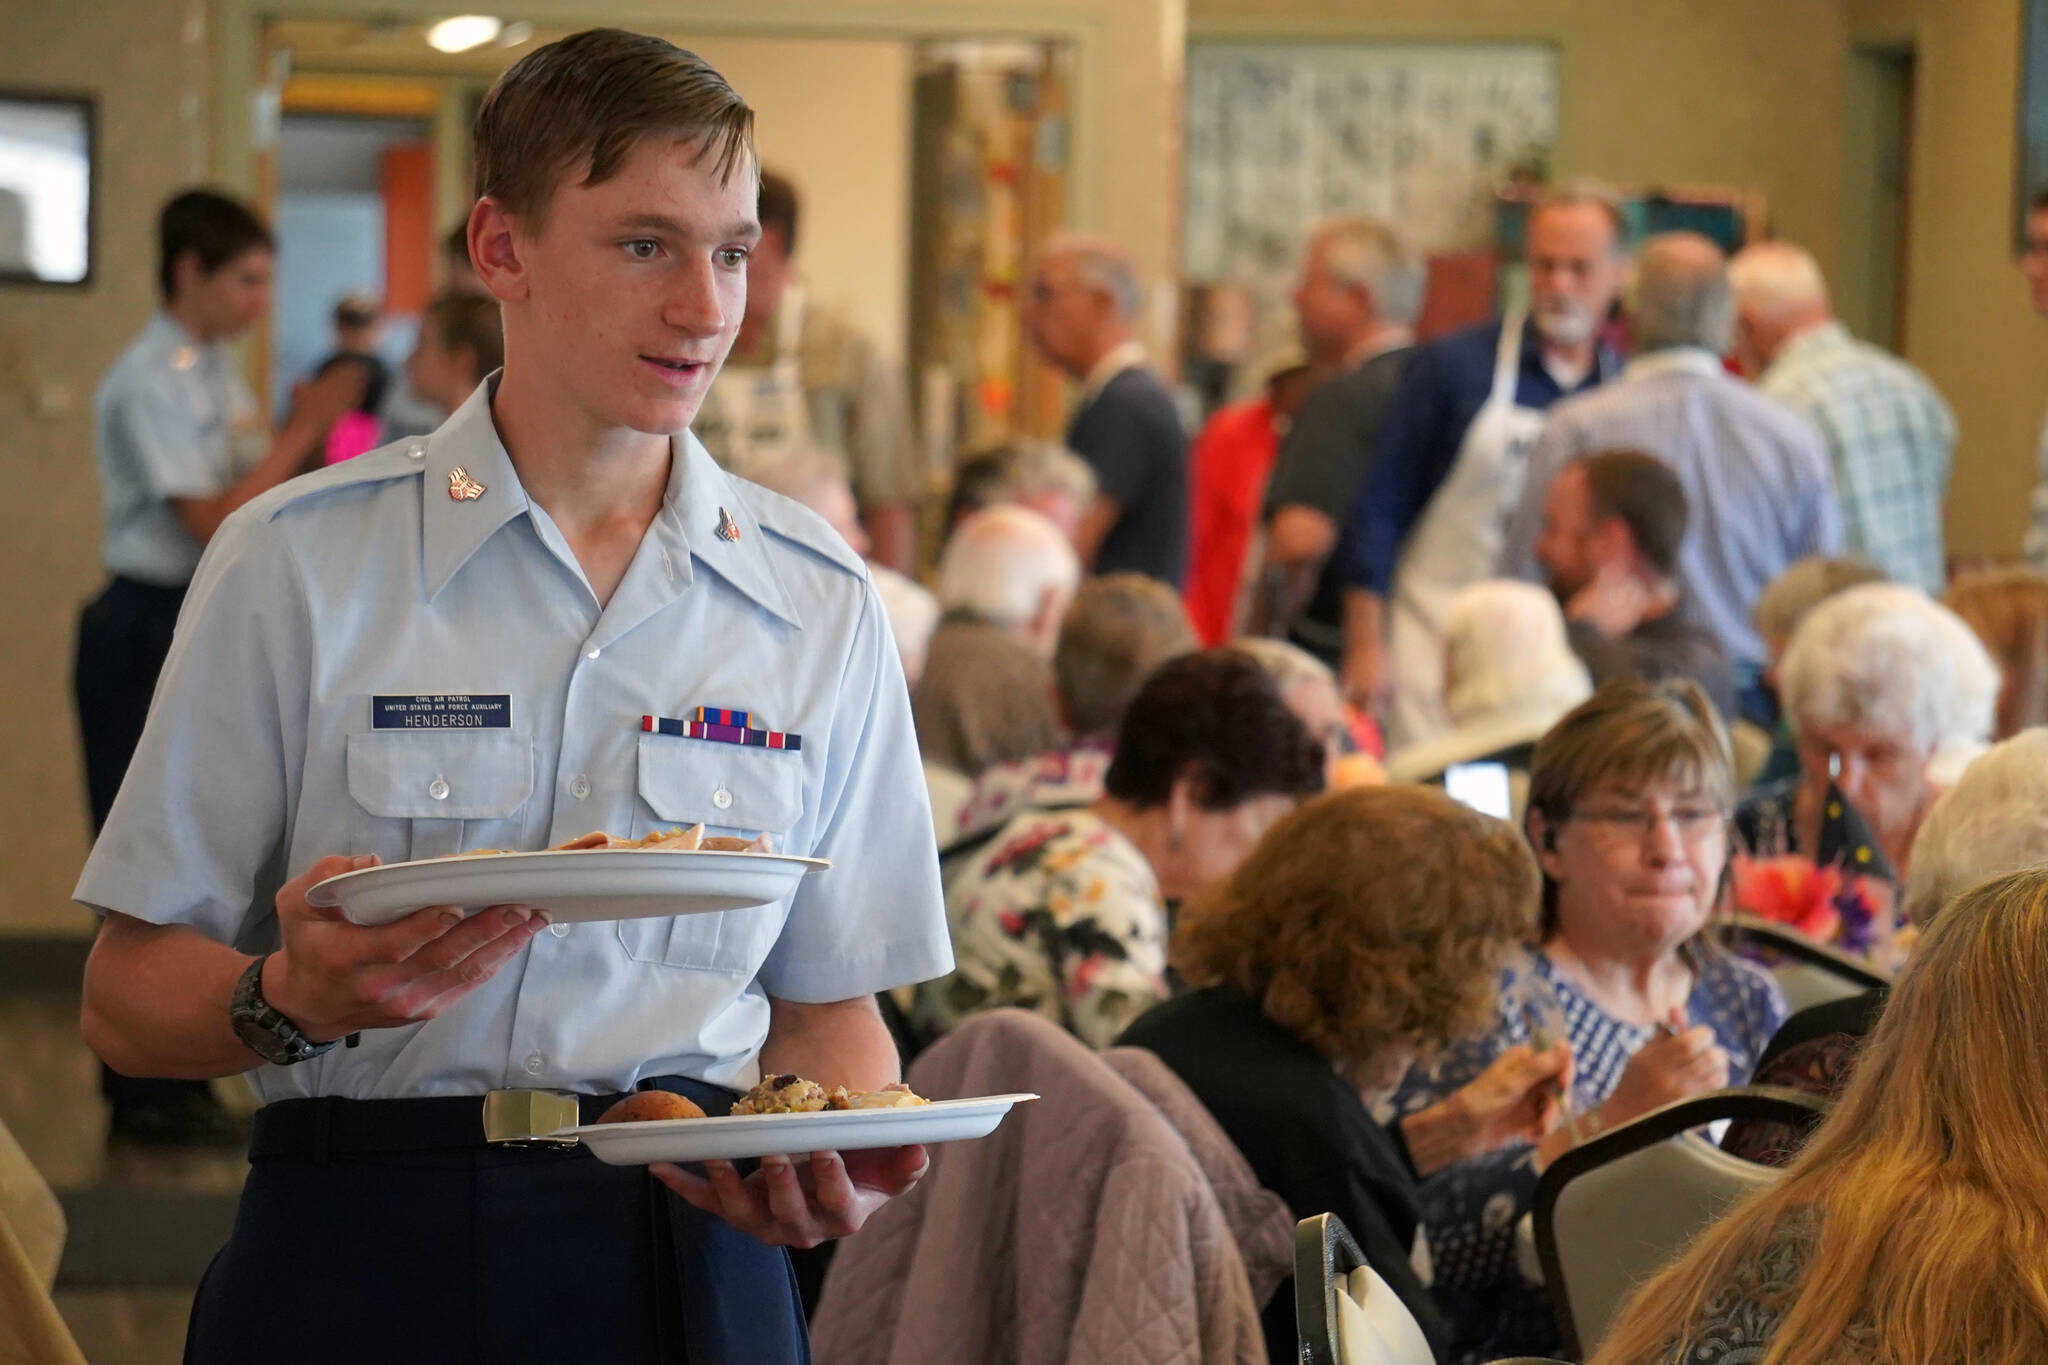 A Civil Air Patrol cadet serves lunch to attendees of the Old Timer’s Luncheon at the Kenai Senior Center in Kenai, Alaska, on Thursday, Aug. 31, 2023. (Jake Dye/Peninsula Clarion)